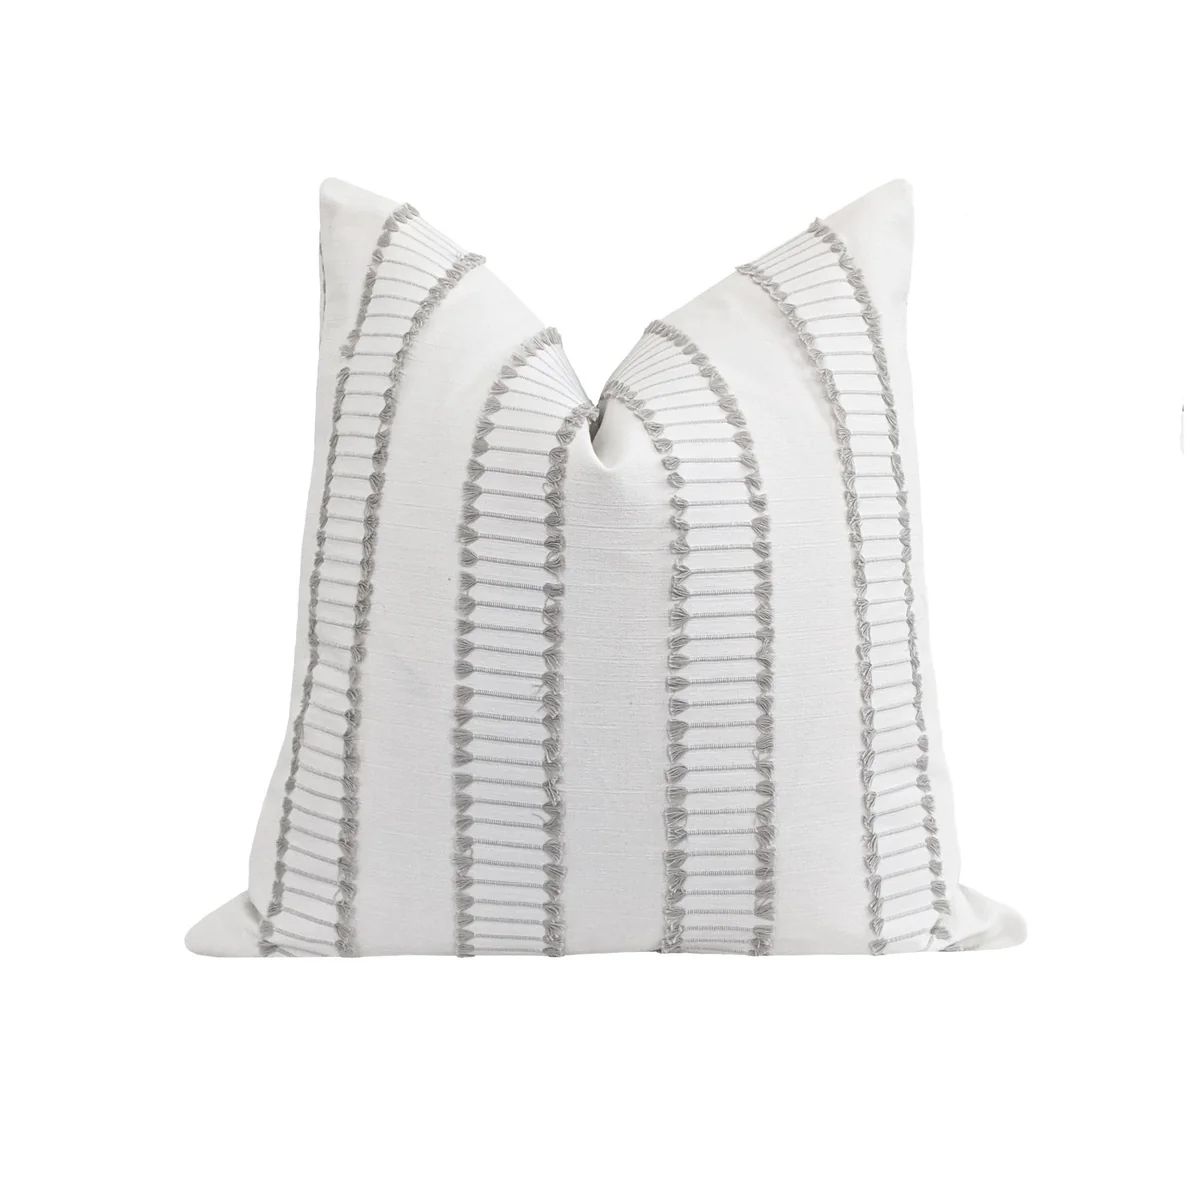 Antonia Fringe Pillow in White and Ash Gray | Land of Pillows